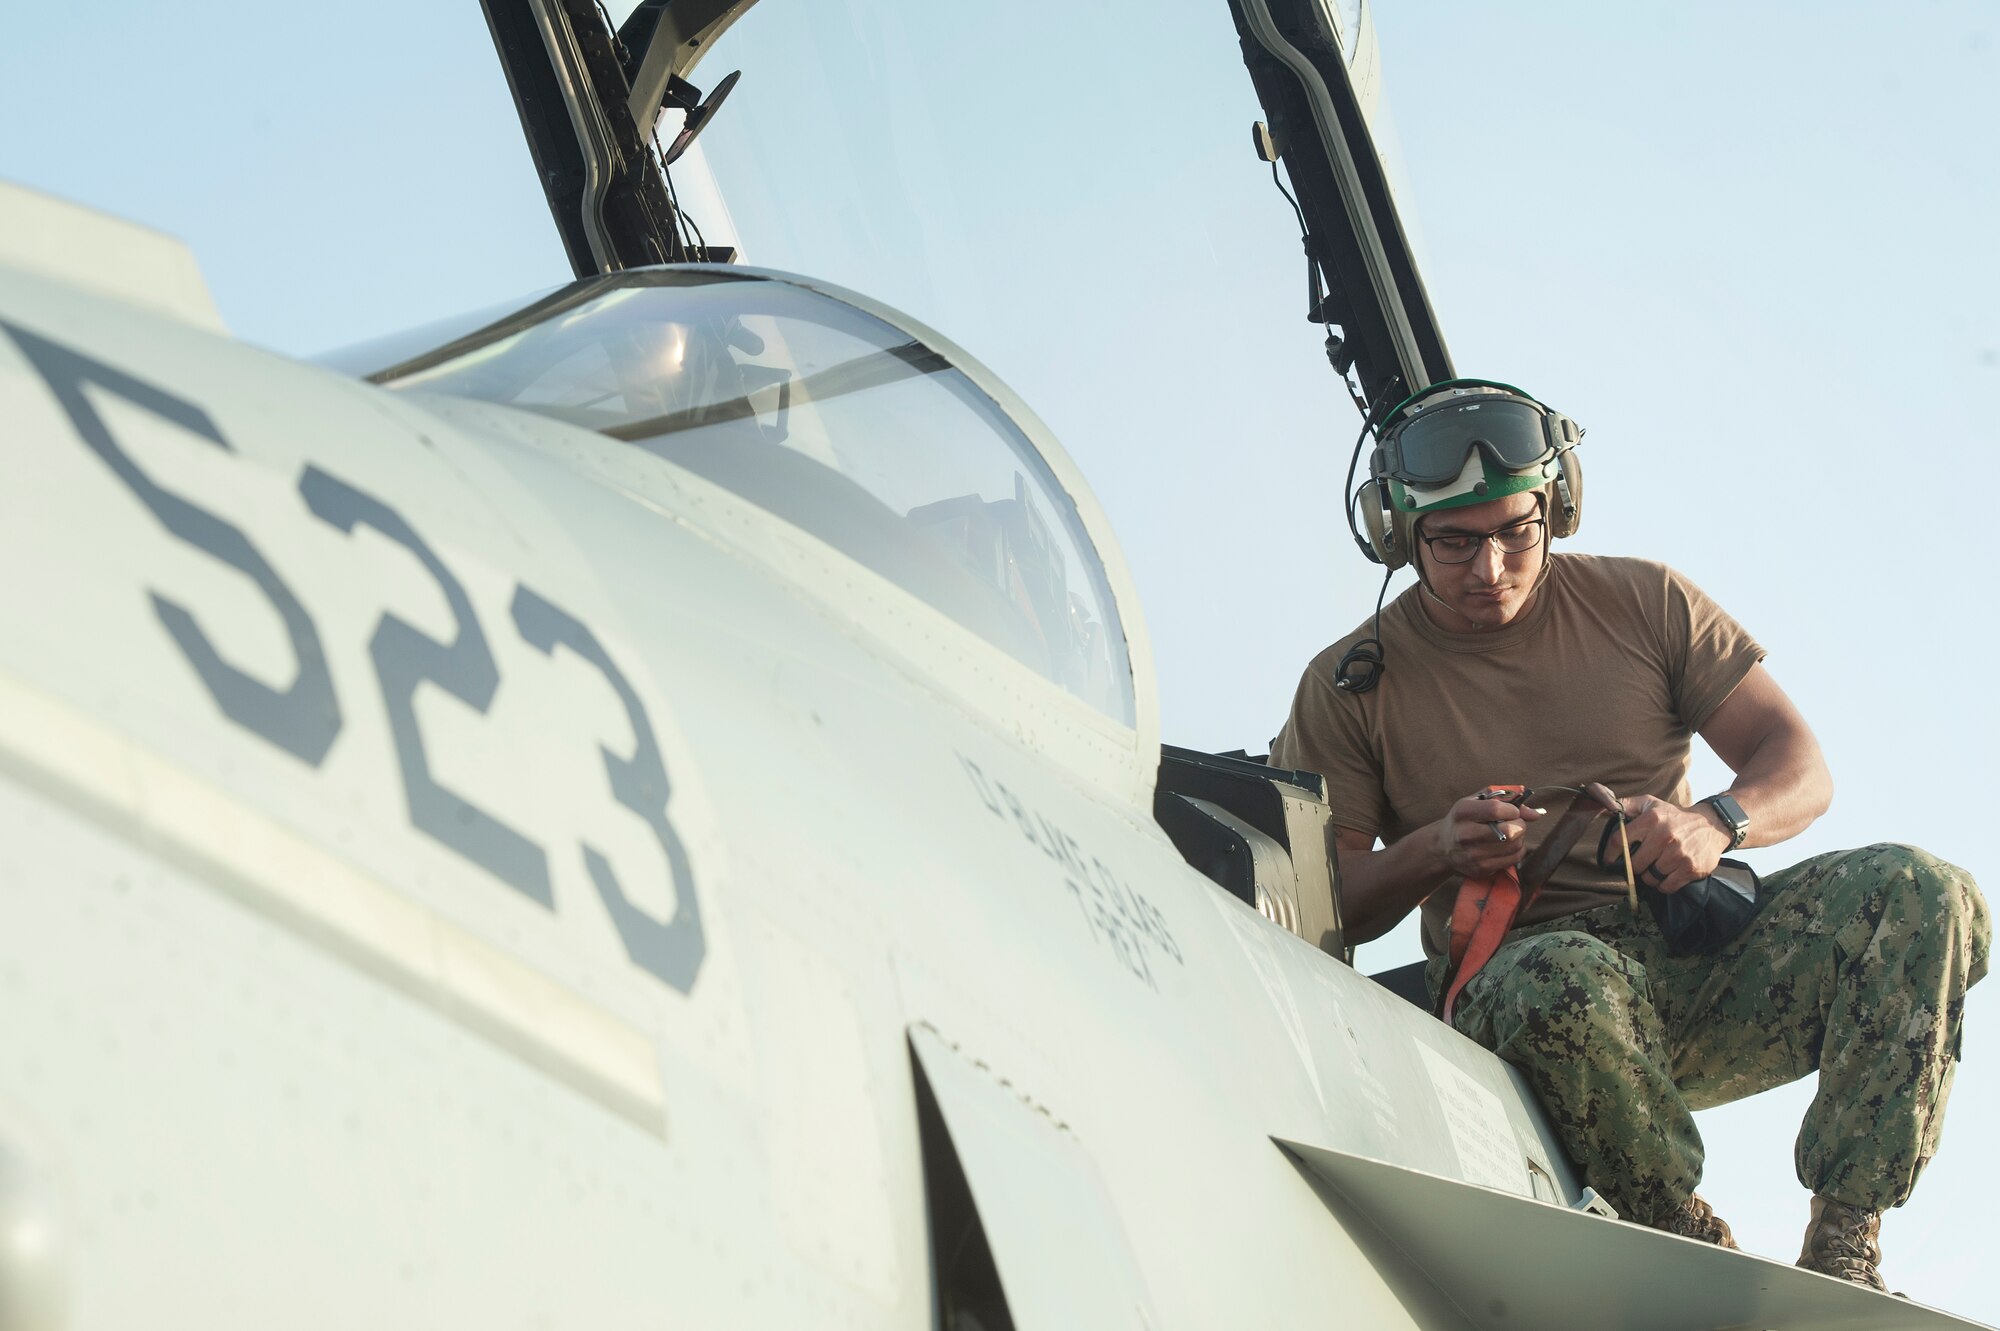 Aviation Machinist Mate 3rd Class Erik Perales from the Electronic Attack Squadron 135 (VAQ-135) “Black Ravens” conducts maintenance on an EA-18G Growler, Oct. 30, 2018, at Al Udeid Air Base, Qatar. The electronic warfare aircraft has electronic attack, jamming, and satellite communication capabilities as well as communication countermeasures. VAQ-135 will replace VMAQ-2, which operated EA-6B Prowlers. VAQ-135 is deployed to the U.S. 5th Fleet area of operations in support of naval operations to ensure maritime stability and security in the Central Region, connecting the Mediterranean and the Pacific through the western Indian Ocean and three strategic choke points. (U.S. Air Force photo by Tech. Sgt. Christopher Hubenthal)